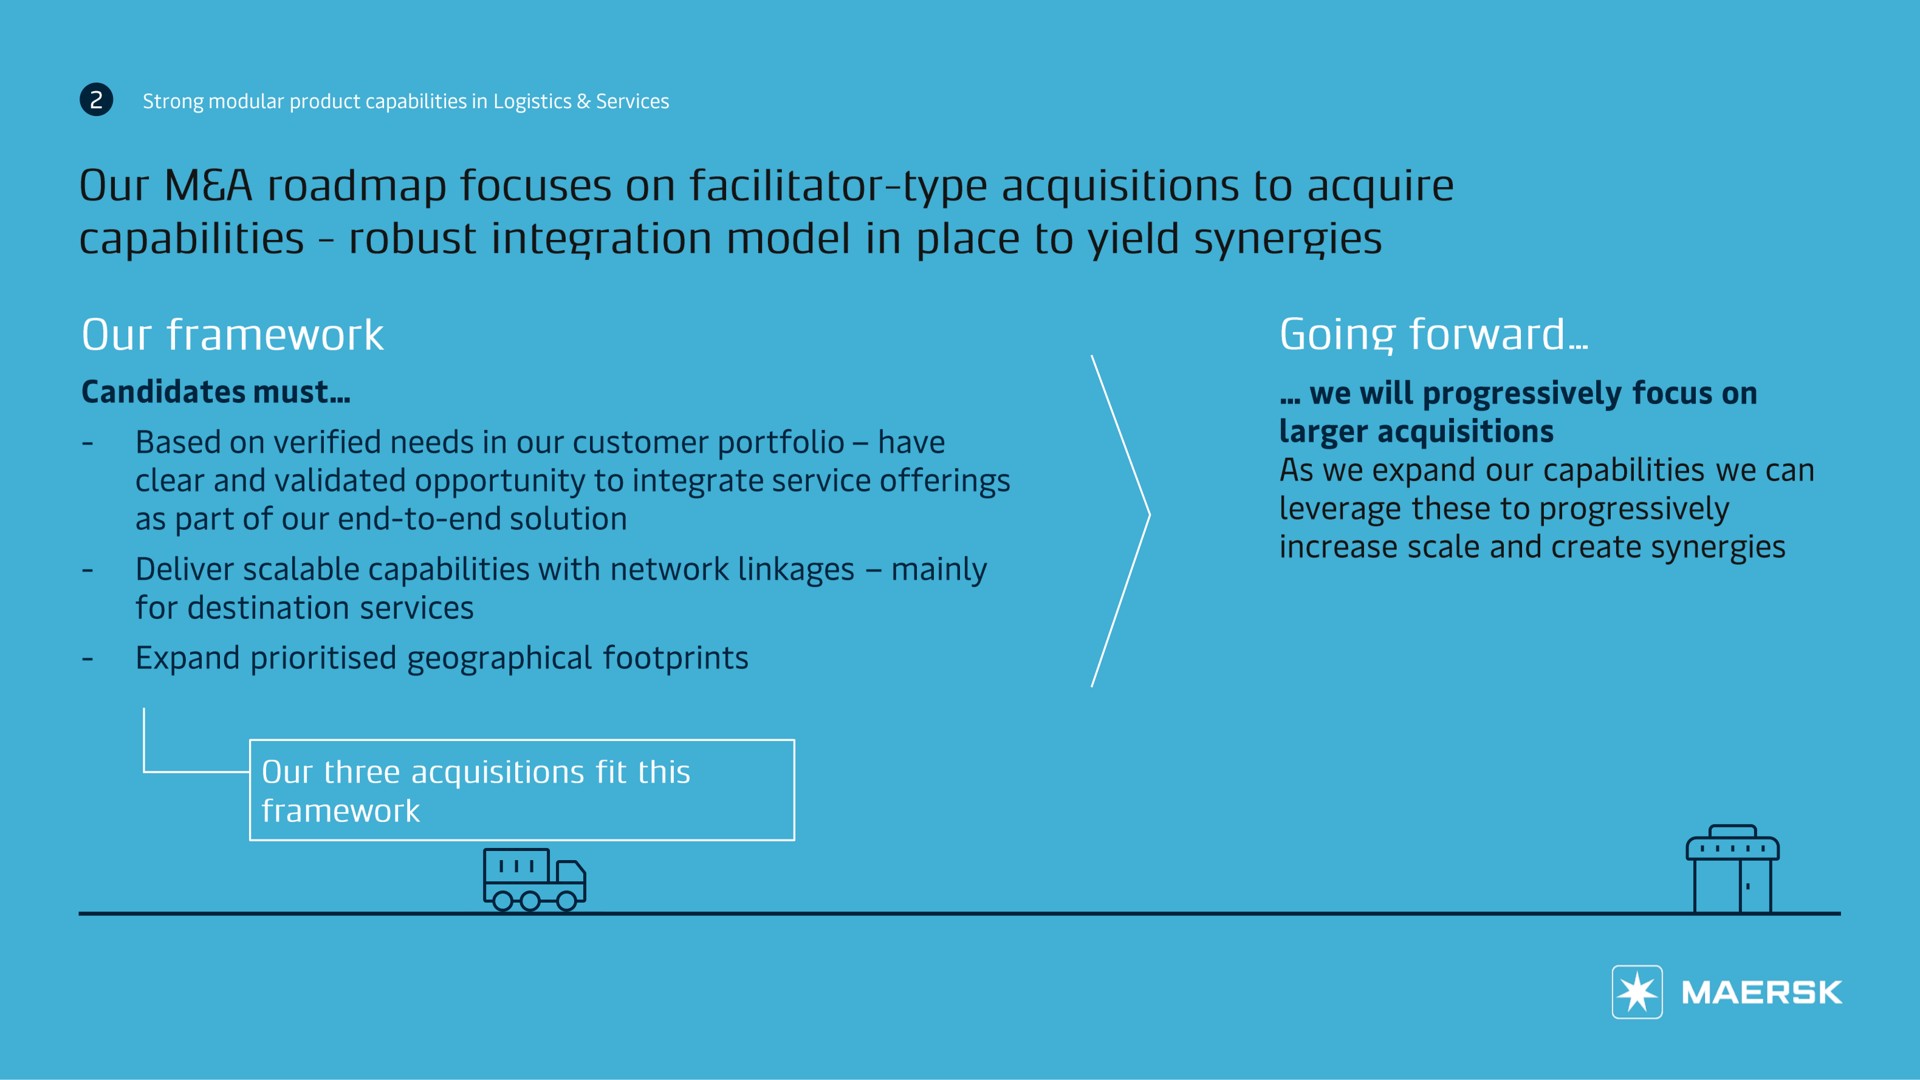 our a focuses on facilitator type acquisitions to acquire capabilities robust integration model in place to yield synergies based on verified needs in our customer portfolio have clear and validated opportunity to integrate service offerings as part of our end to end solution acquisitions as we expand our capabilities we can leverage these to progressively | Maersk